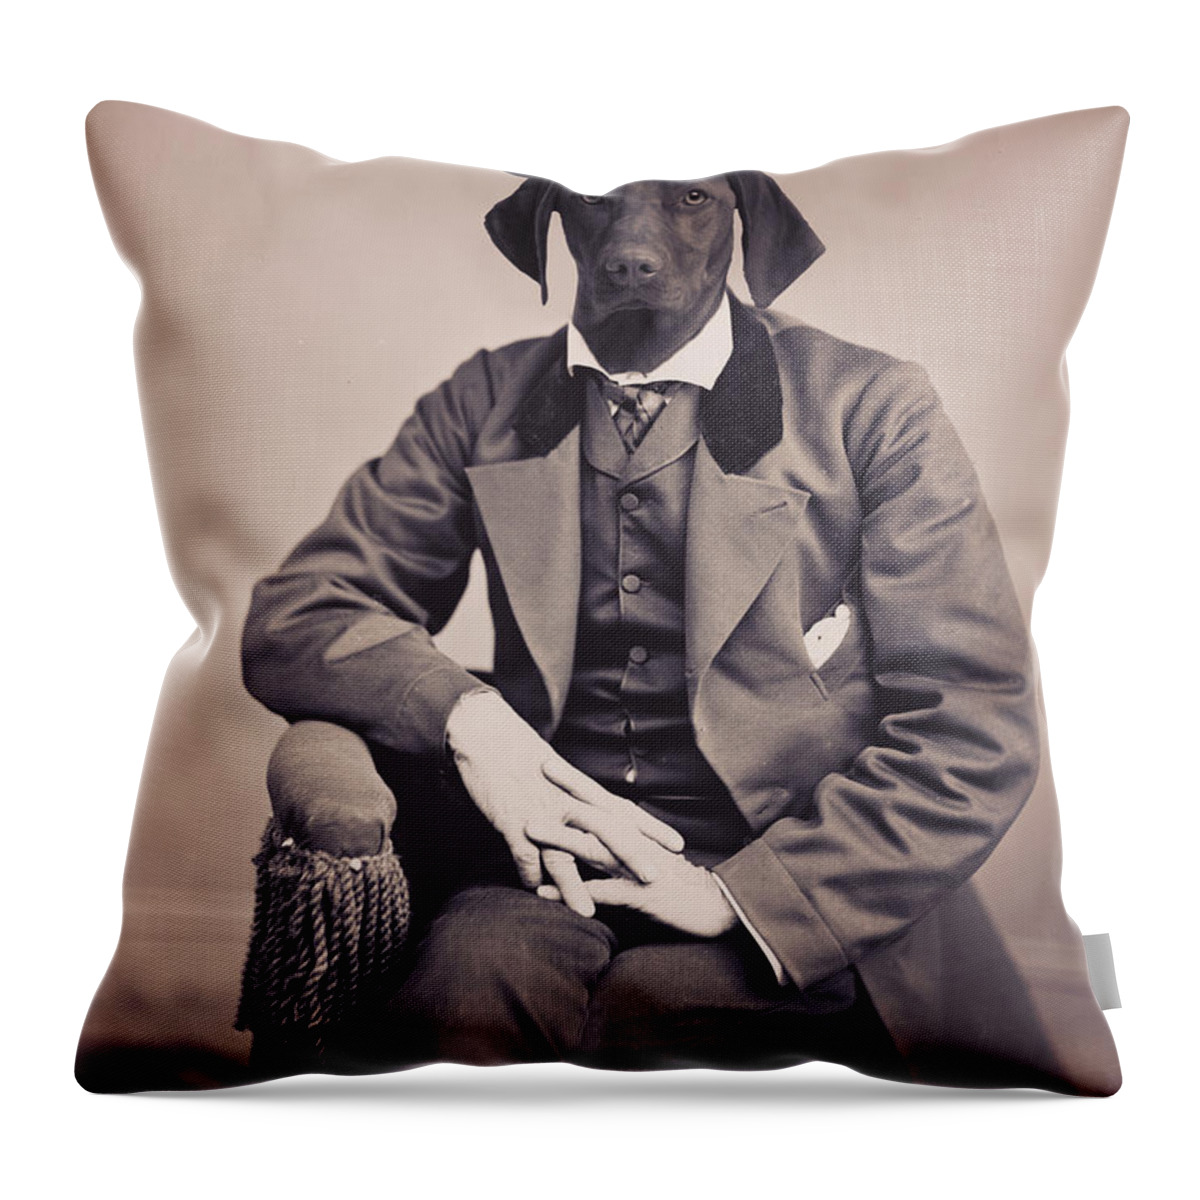 German Pointer Throw Pillow featuring the photograph Posing German Pointer by Aged Pixel